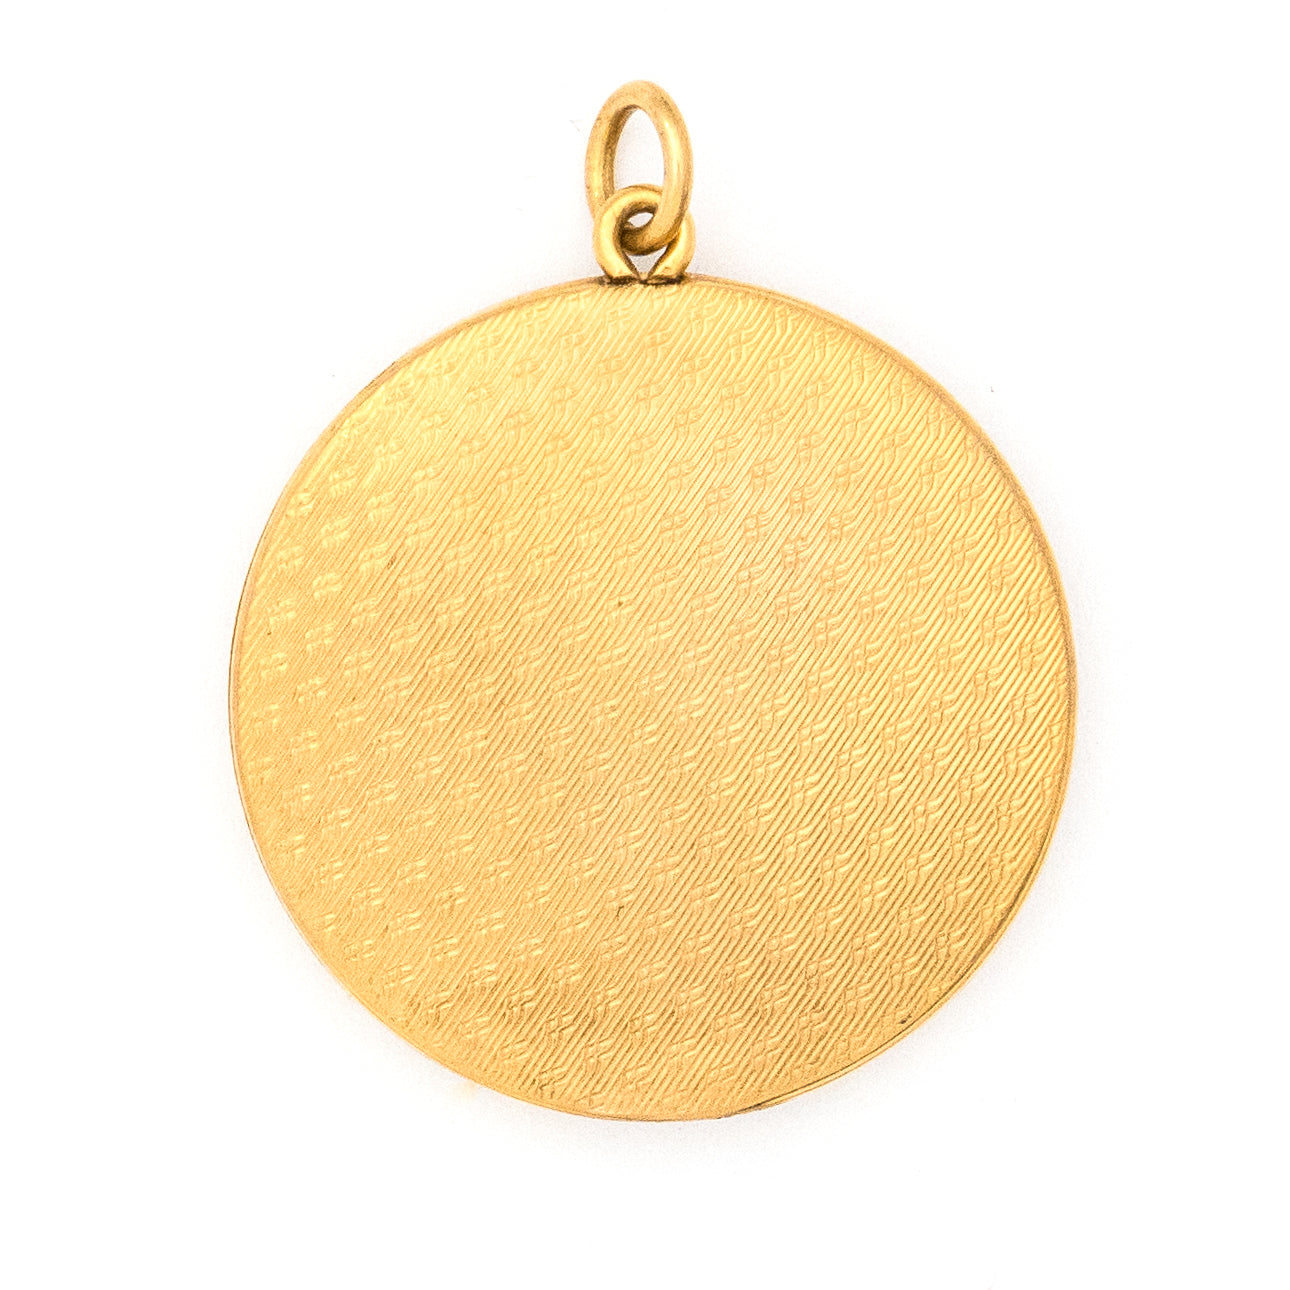 Textured Waves Antique Locket, delicate repeating pattern, gold fill locket, front locket view